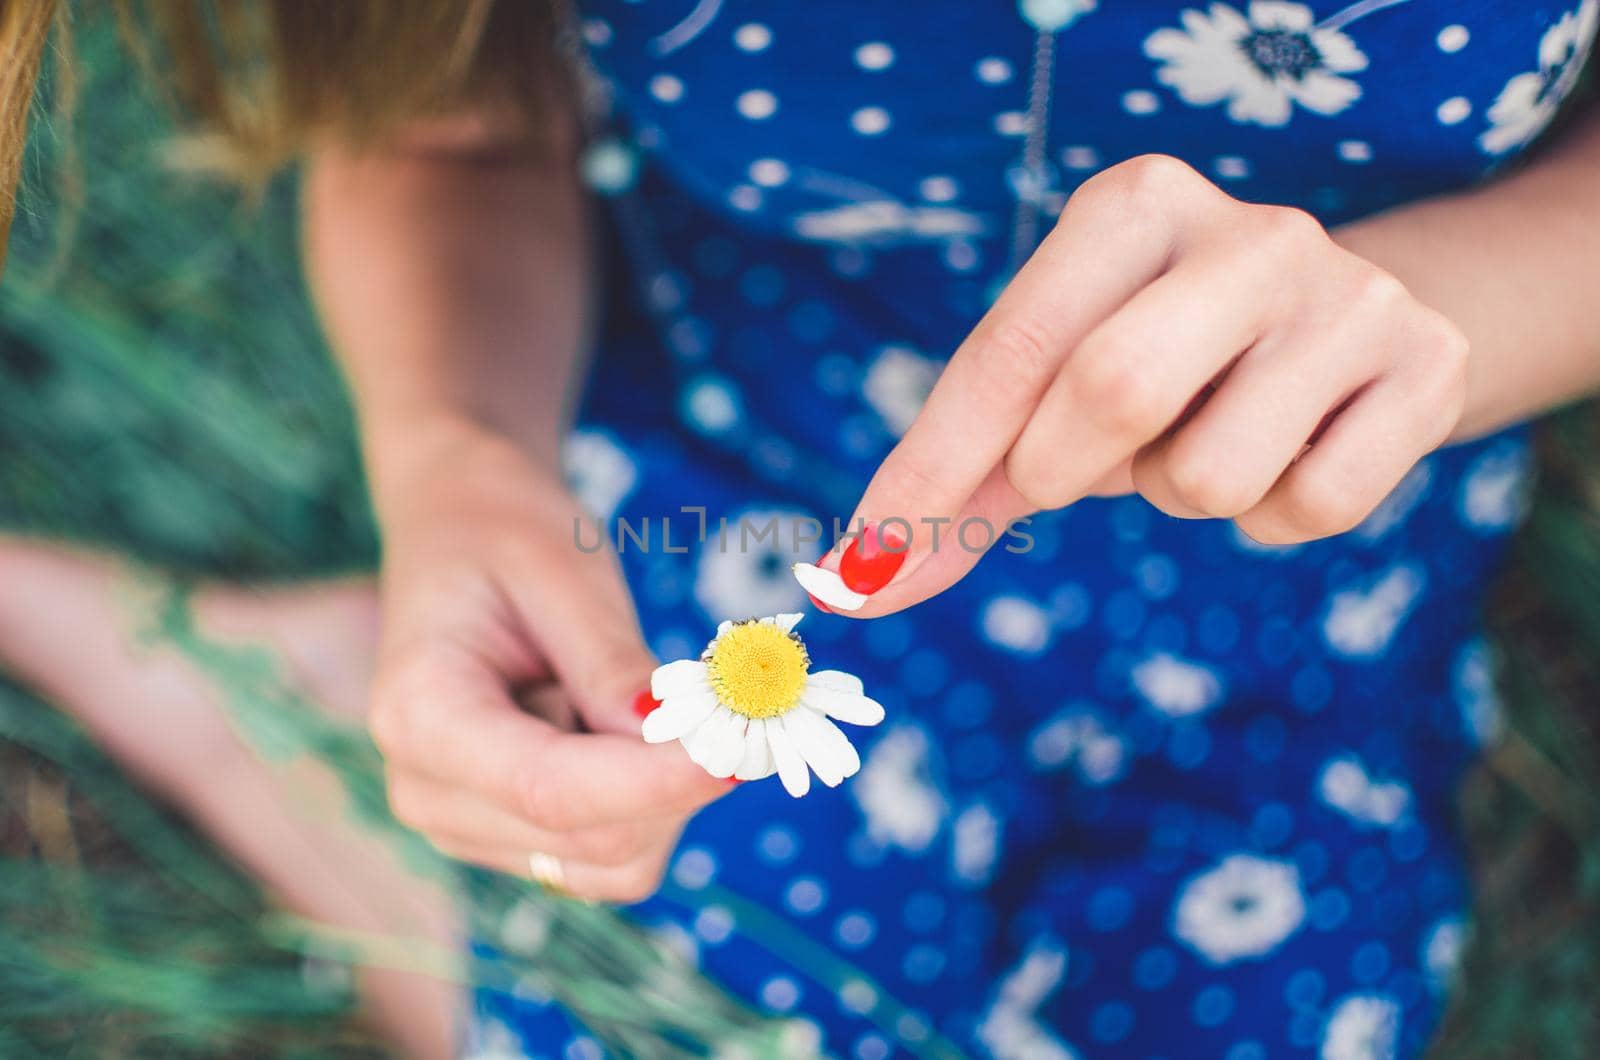 A young smiling, European girl, blonde with fair skin, holds a daisy flower in her hands and tears off the petals. Women's blue short skin-tight dress with white daisy print. Red manicure